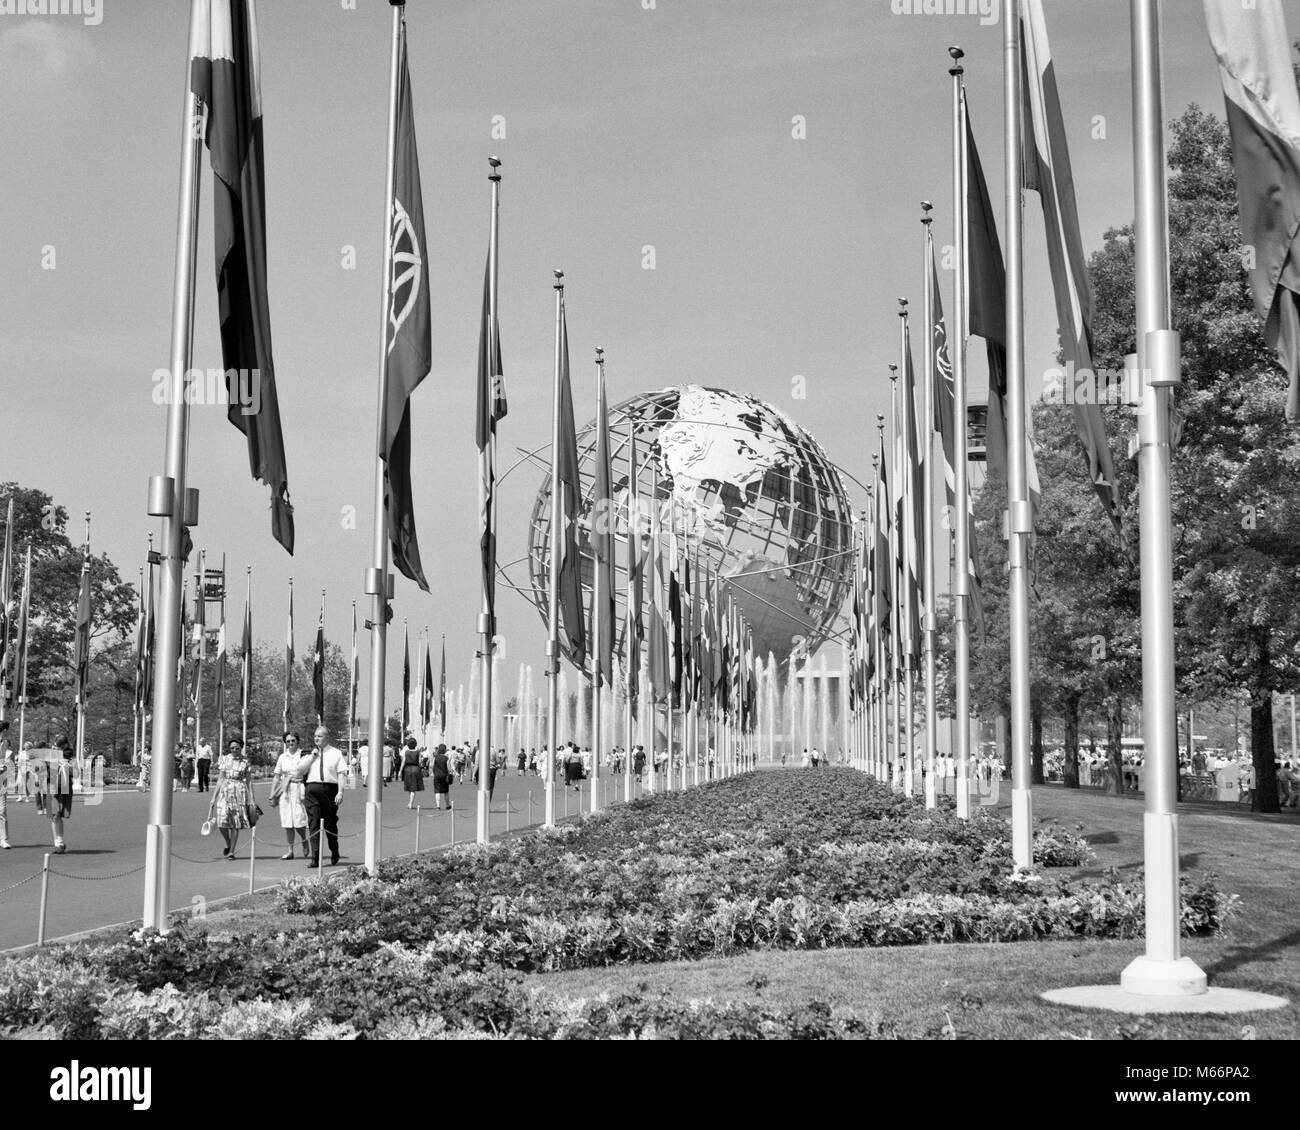 1960s 1964 UNISPHERE WITH INTERNATIONAL FLAGS NEW YORK WORLD'S FAIR FLUSHING MEADOW PARK NY USA - q64212 CPC001 HARS OLD FASHIONED Stock Photo